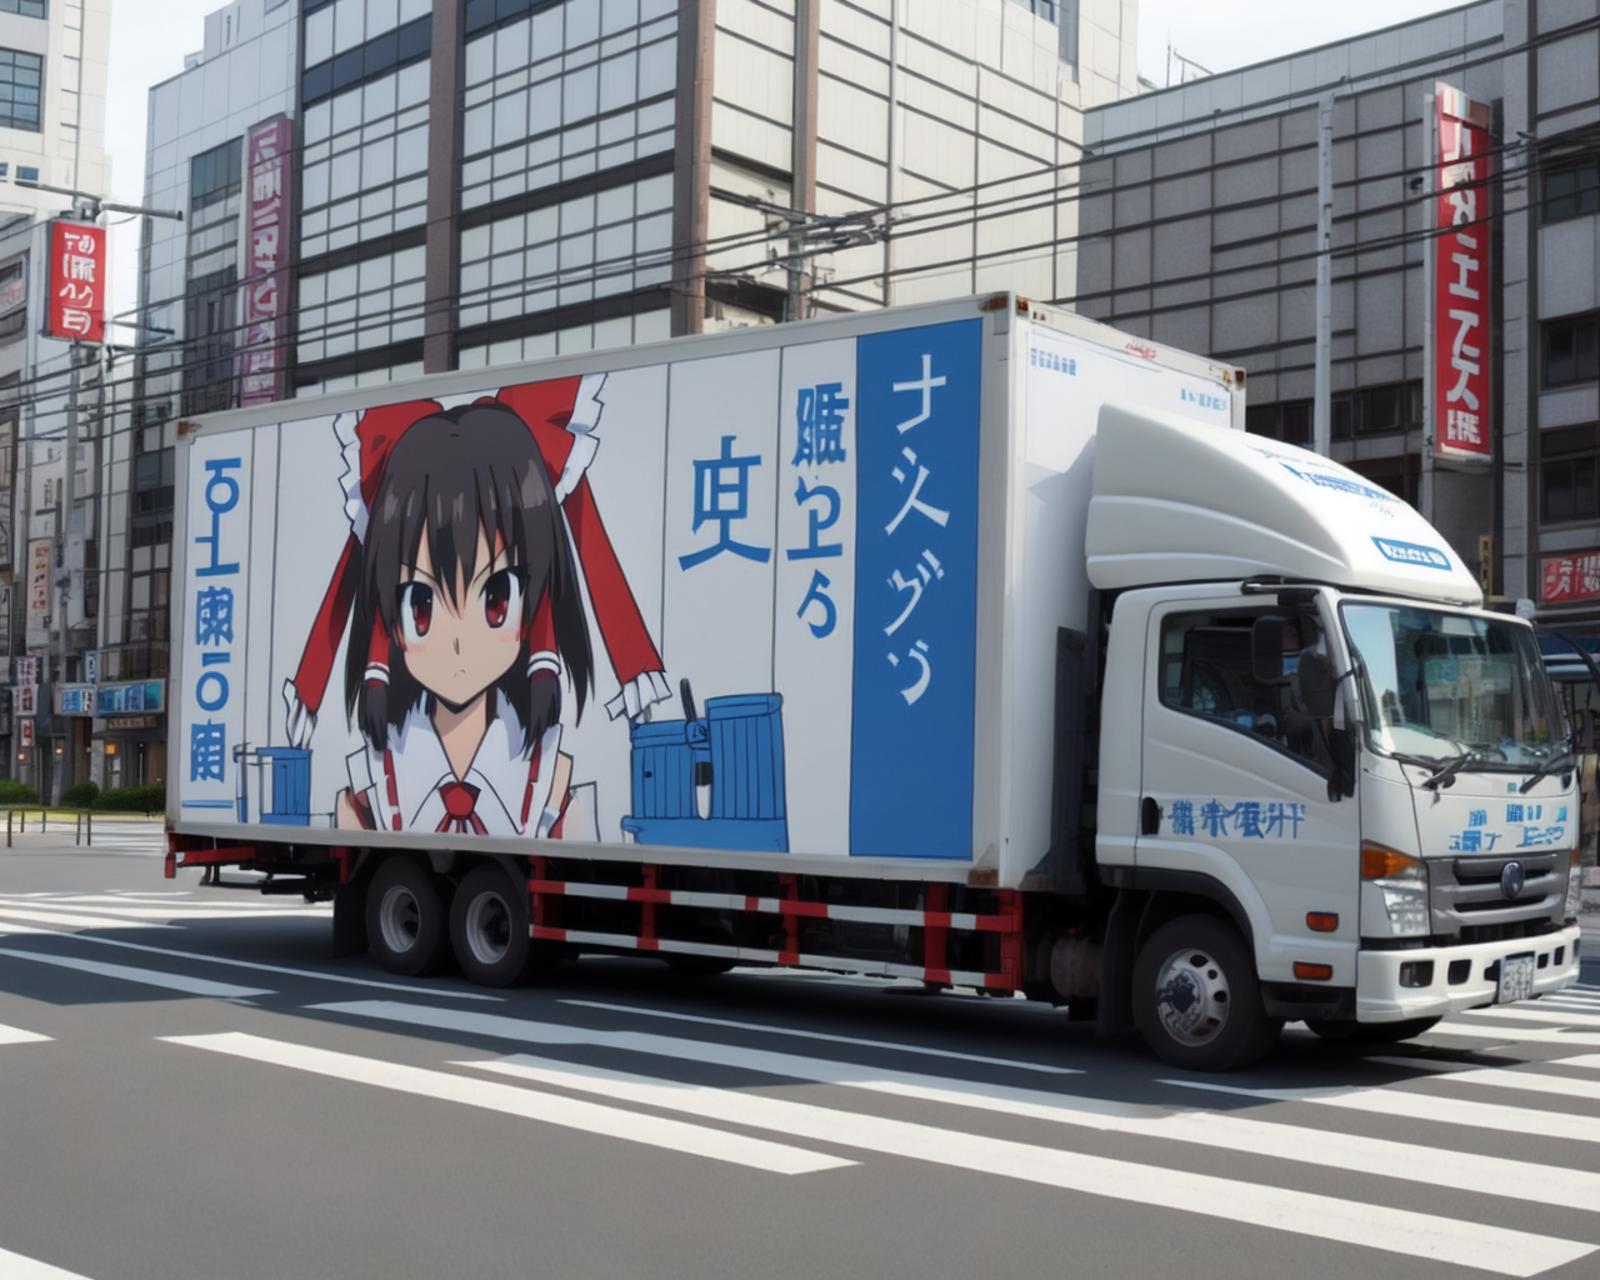 advertising truck image by Liquidn2